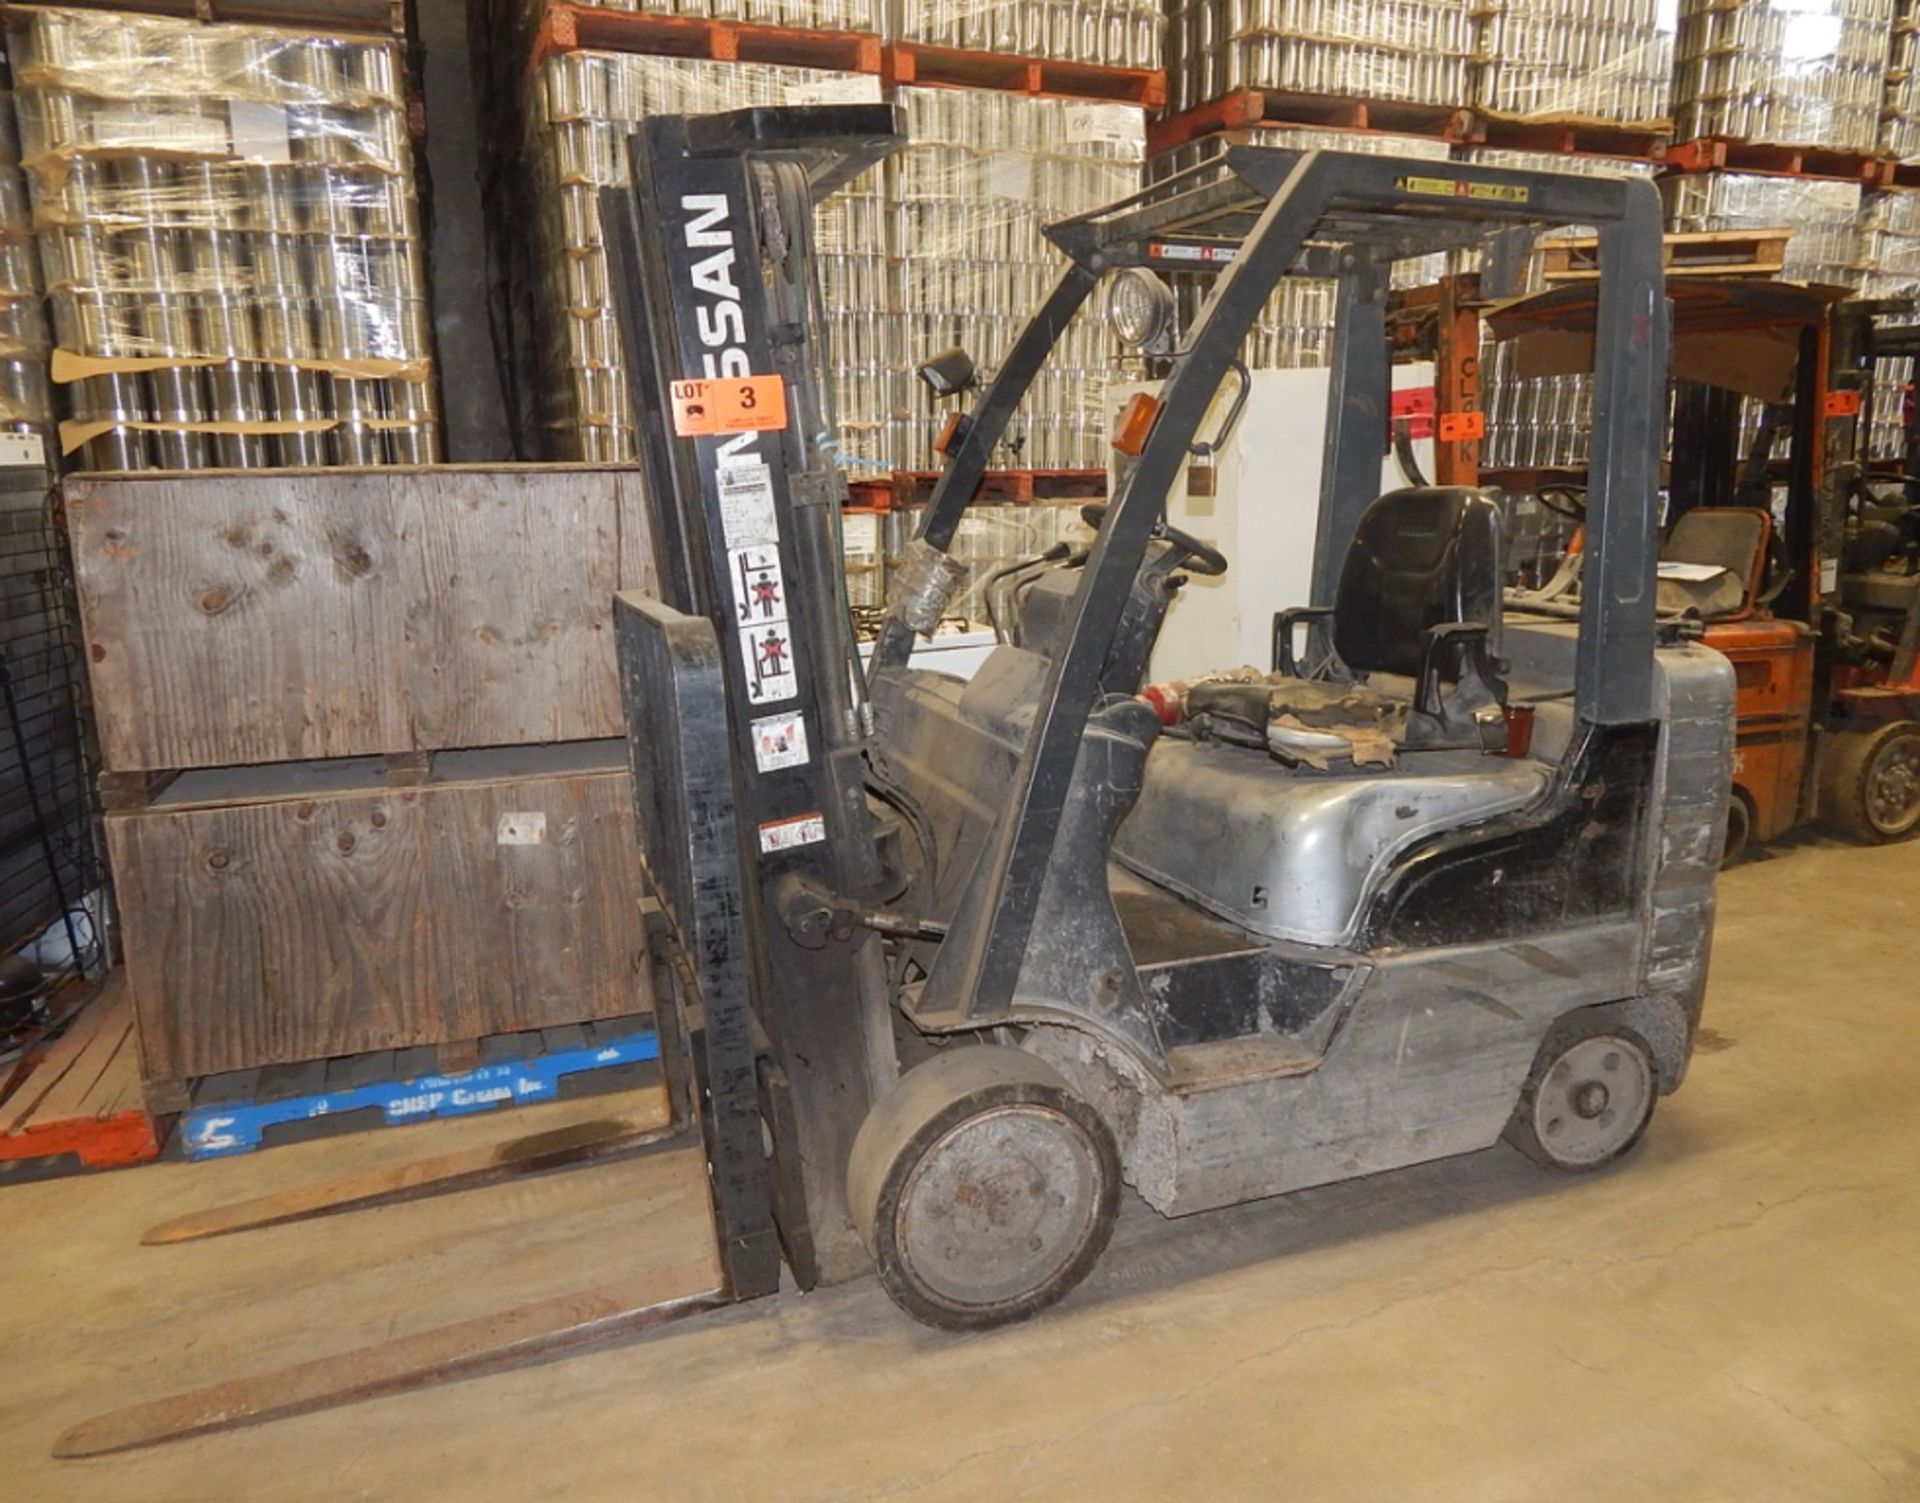 NISSAN MCPL02A2SLV LPG FORKLIFT WITH 4400 LB. CAPACITY, 187" VERTICAL LIFT, SIDE SHIFT, CUSHION